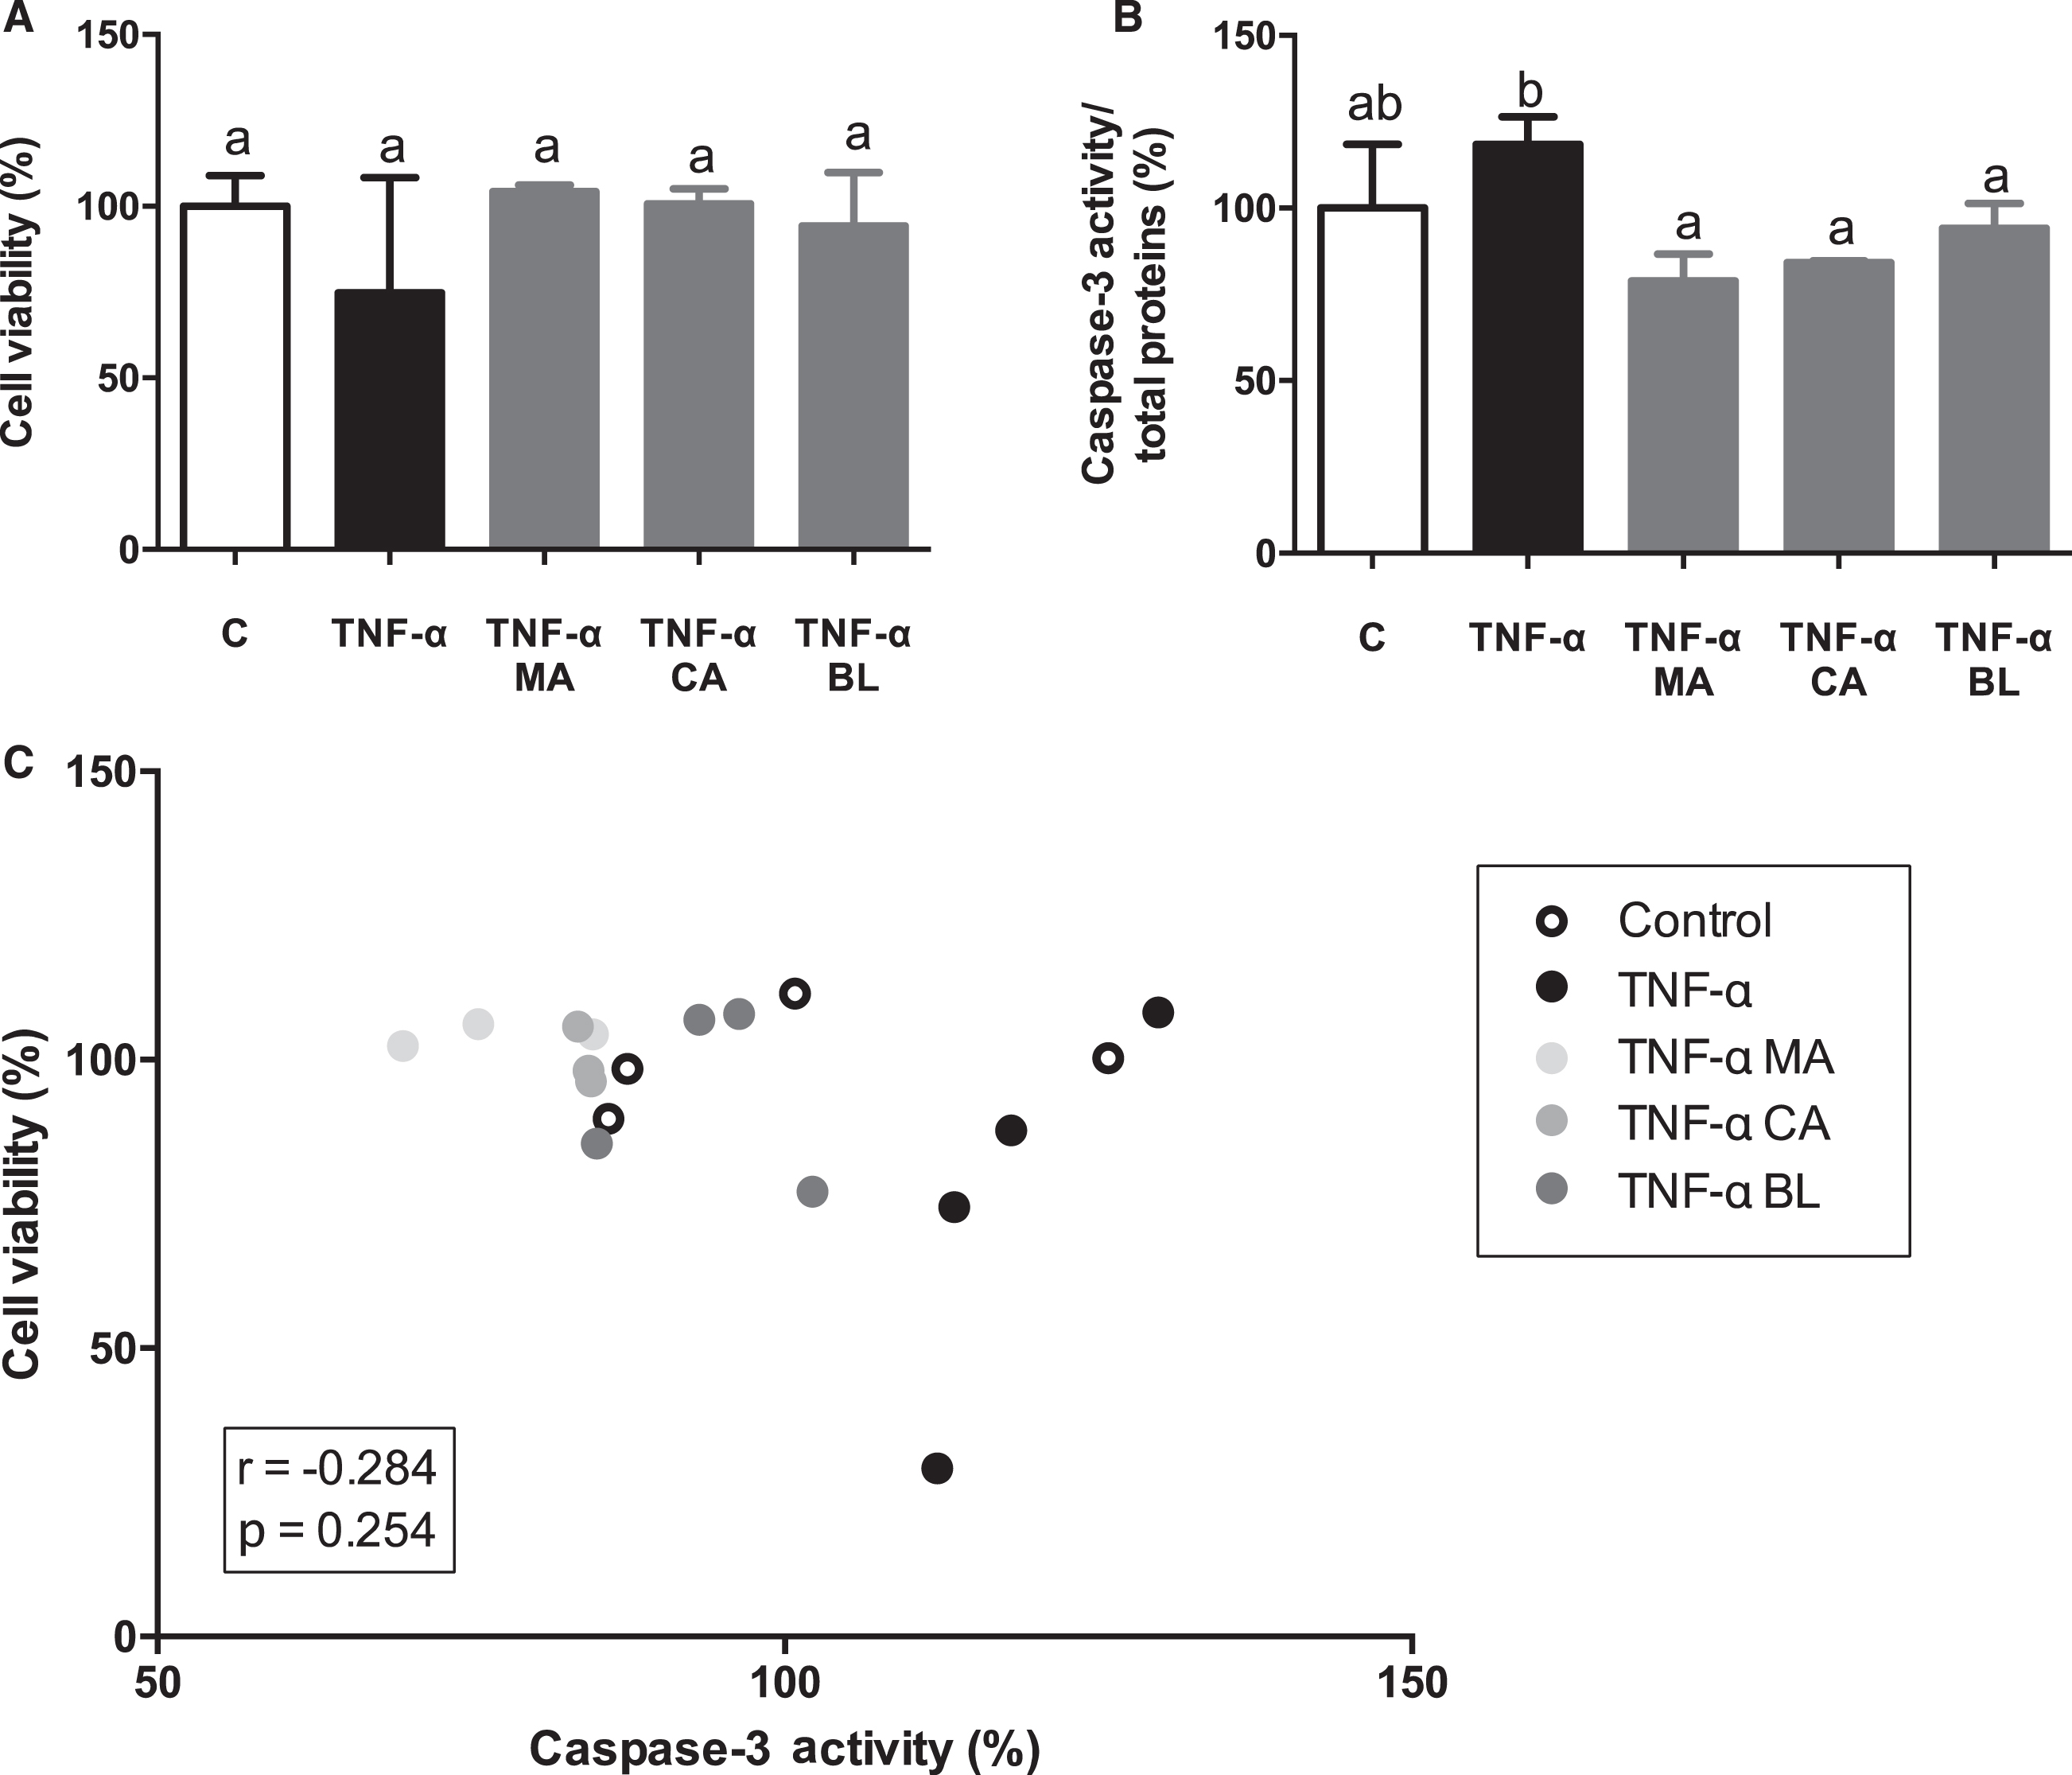 Effects of berries extracts on adipocytes viability and death. Human visceral preadipocytes were differentiated, pre-treated with 100 μM total polyphenols from each extract for 1 hour, then primed 24 hours with 4 ng/mL of TNF-α. Cells and culture media were saved for further determinations. (A) Cell viability determined by LDH activity, (B) Caspase-3/total protein, and (C) Cell viability vs. caspase-3 activity, were assayed. Data (n = 3–4) were expressed as mean±SD and analyzed with one-way ANOVA followed by Tukey posthoc tests. C, control; MA, Maqui; CA, Calafate; BL, Blueberry; r, Pearson correlation coefficient. Different letters showed a statistical significance of at least p < 0.05.